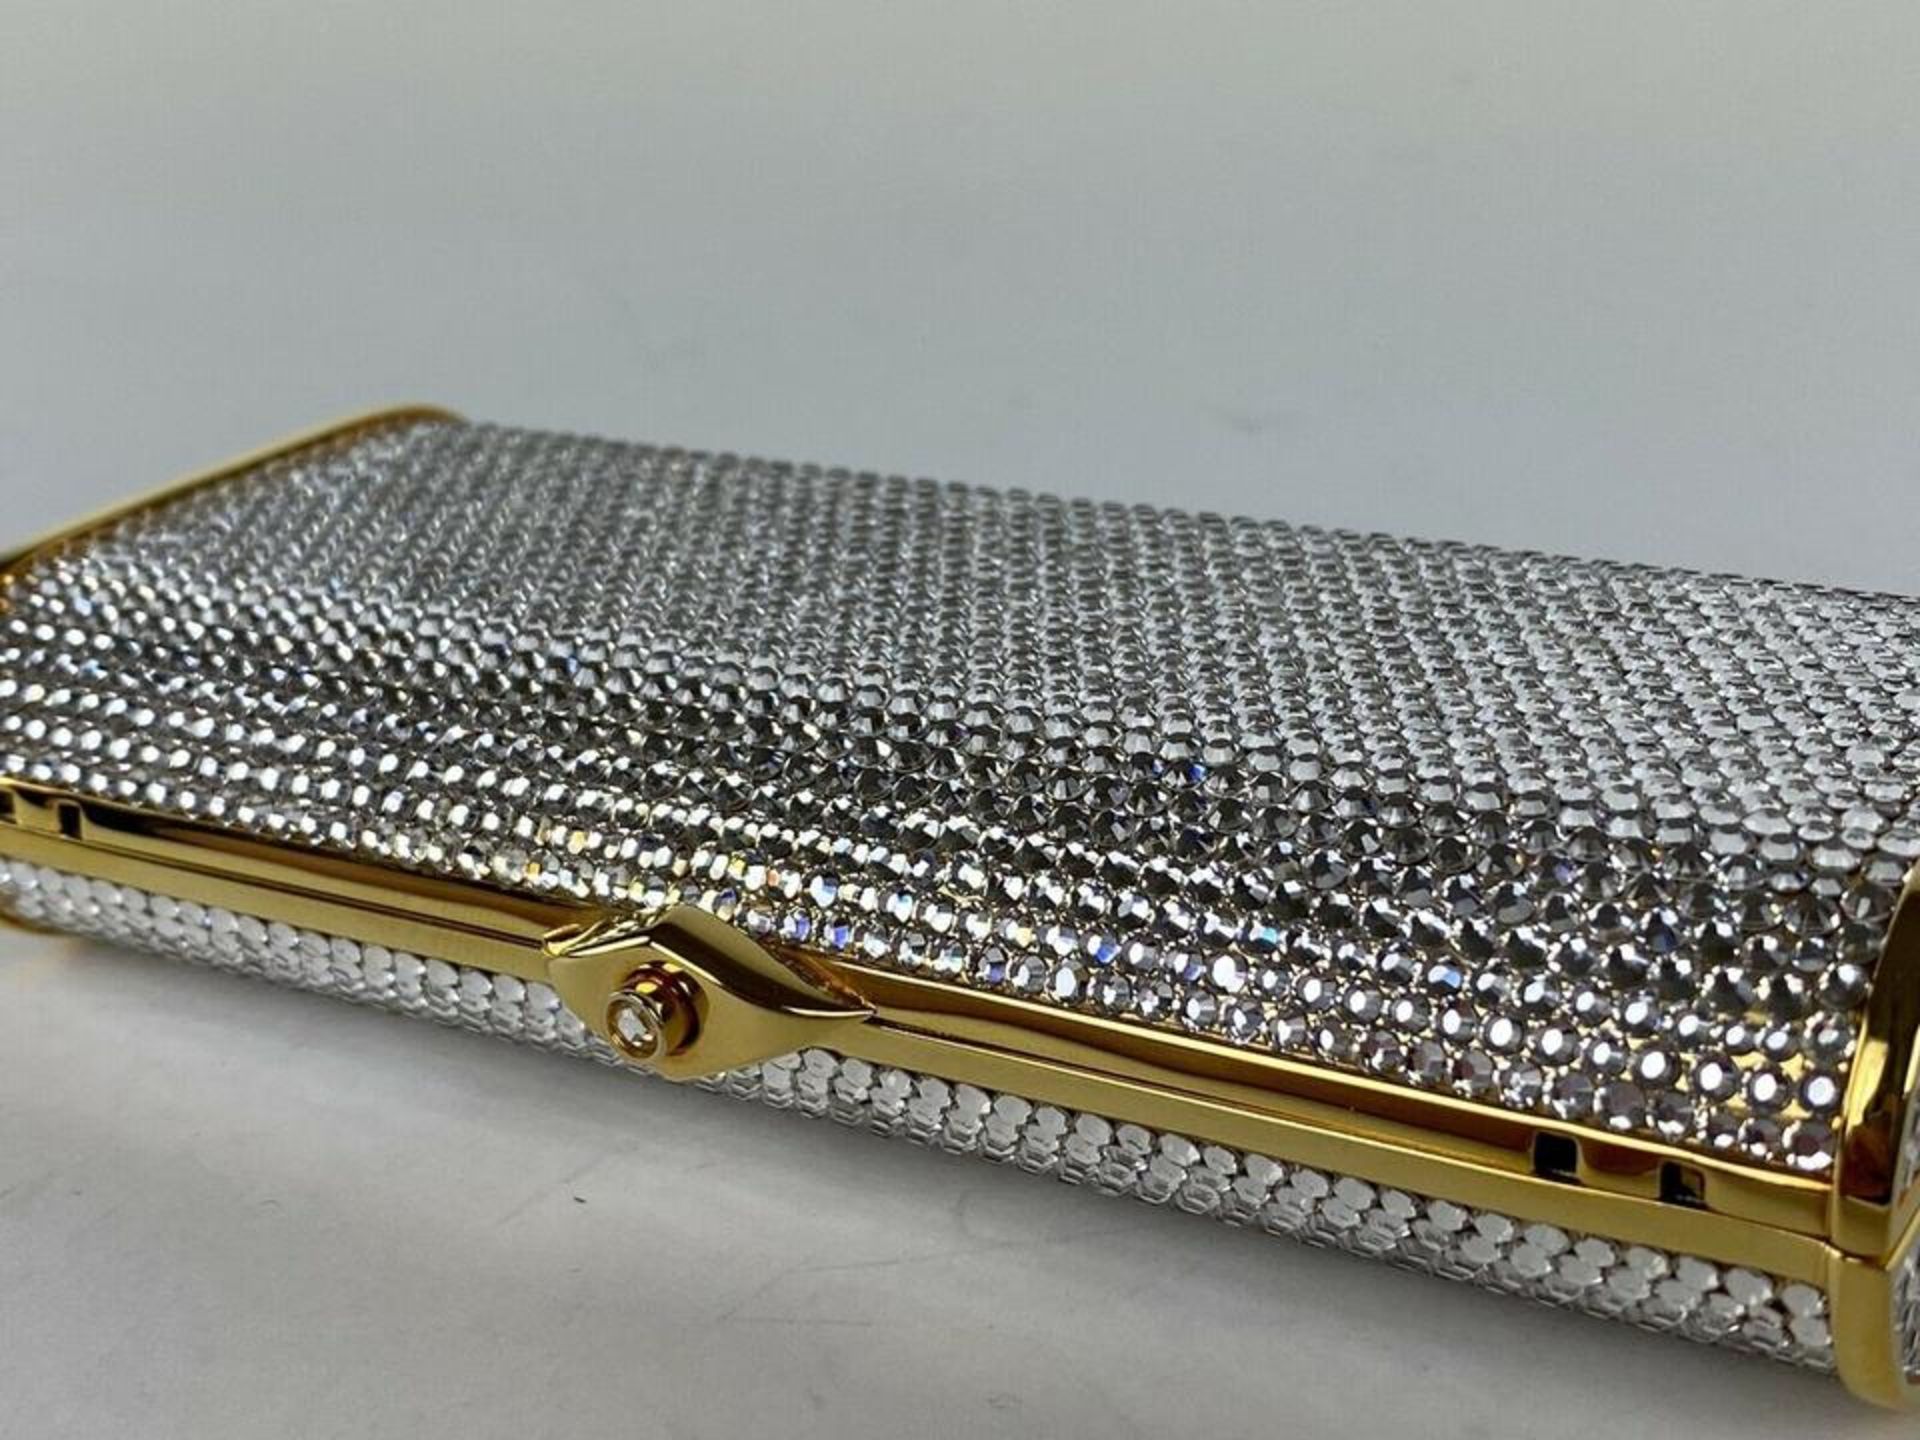 JUDITH LEIBER FULL BEAD CRYSTAL MINAUDIERE GOLD SILVER CHAIN CROSSBODY EVENING - Image 7 of 9